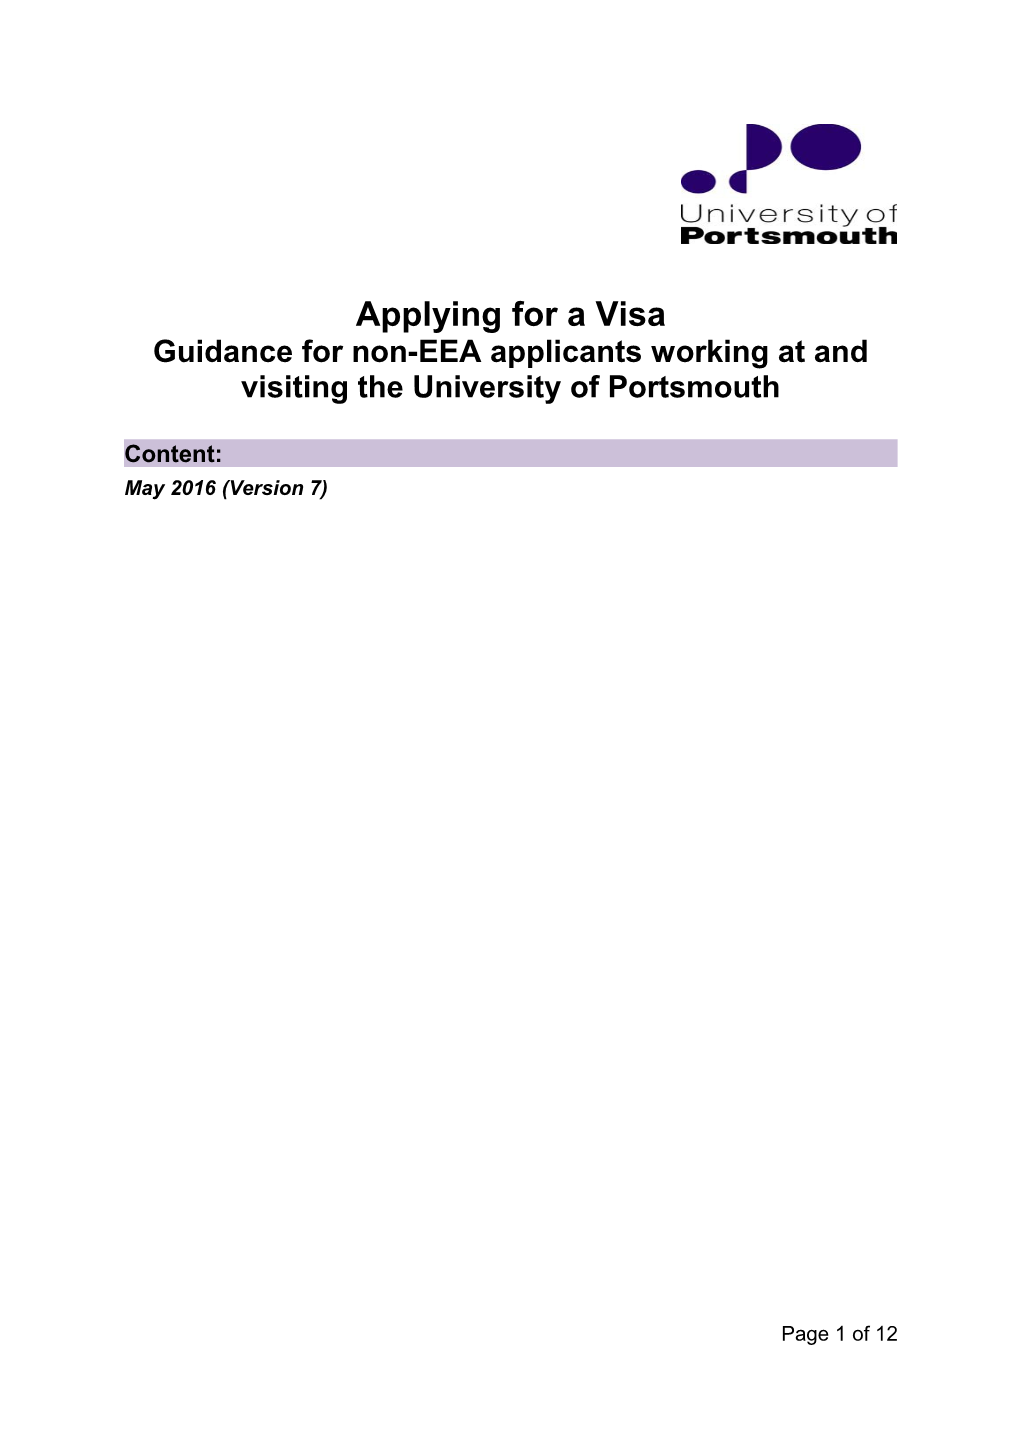 Guidance for Non-EEA Applicants Working at and Visiting the University of Portsmouth